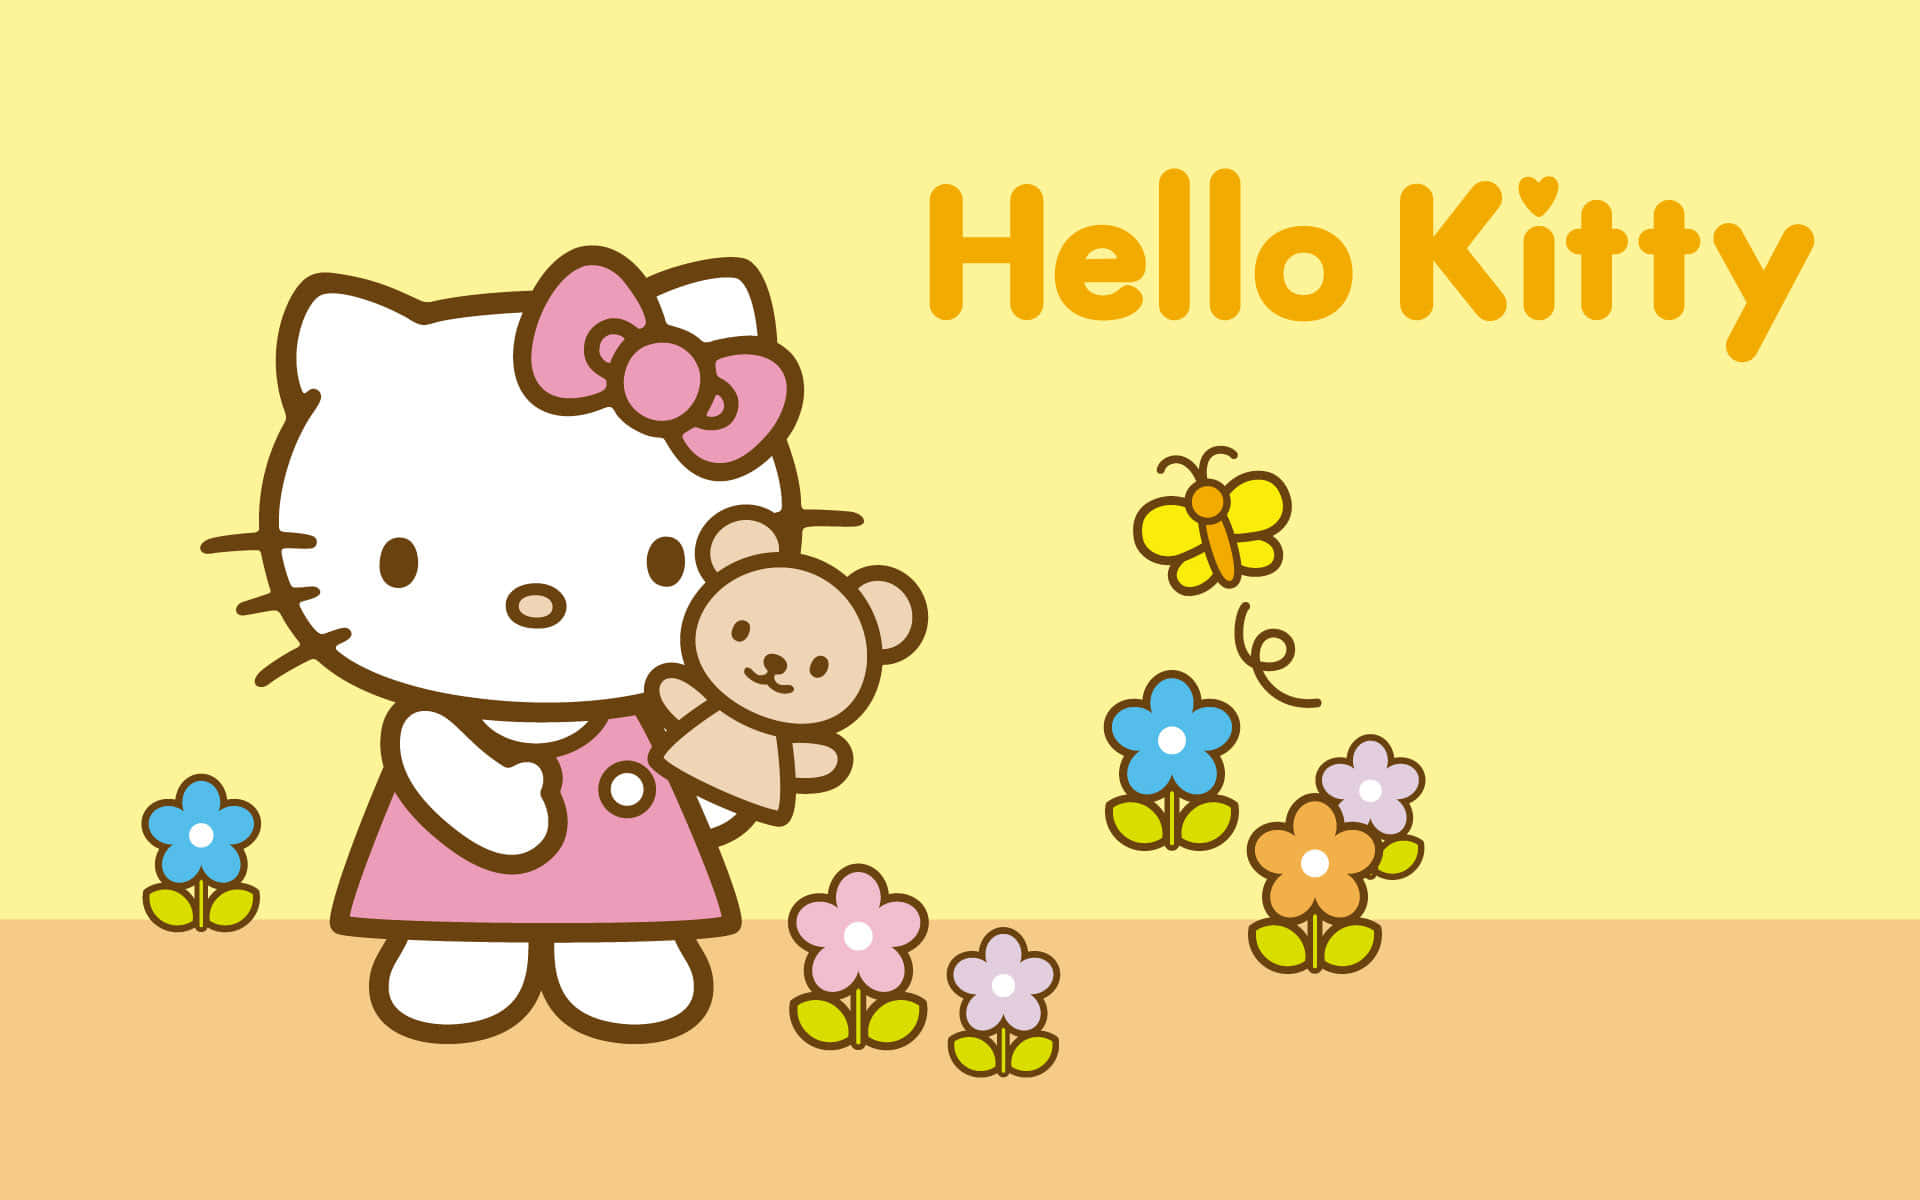 Give your desktop a fun makeover with the Hello Kitty PC Wallpaper